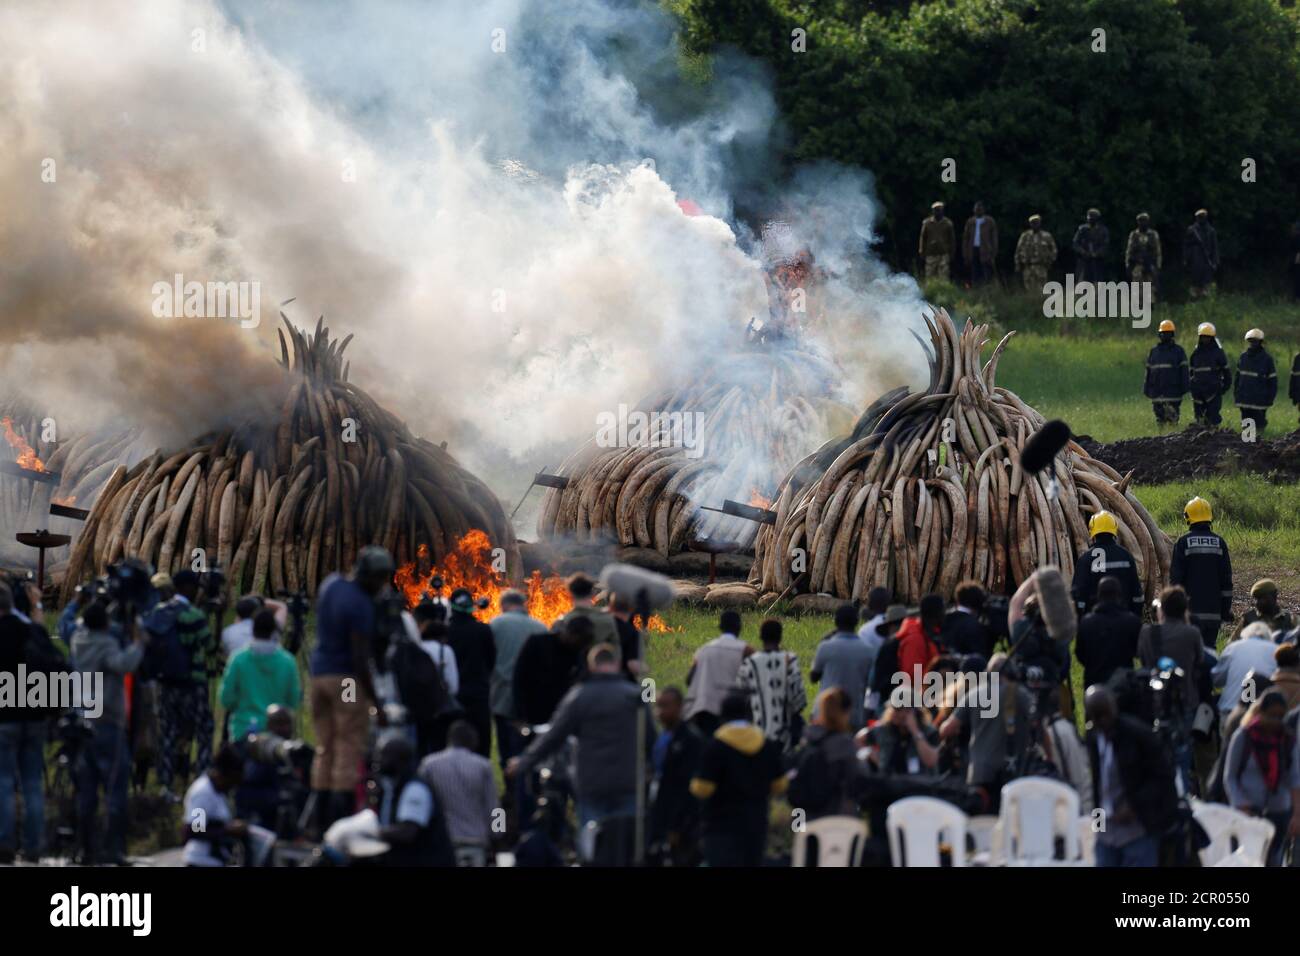 A general view shows part of 105 tonnes of elephant tusk ivory confiscated from smugglers and poachers burning at Nairobi National Park near Nairobi, Kenya, April 30, 2016. REUTERS/Thomas Mukoya     TPX IMAGES OF THE DAY Stock Photo